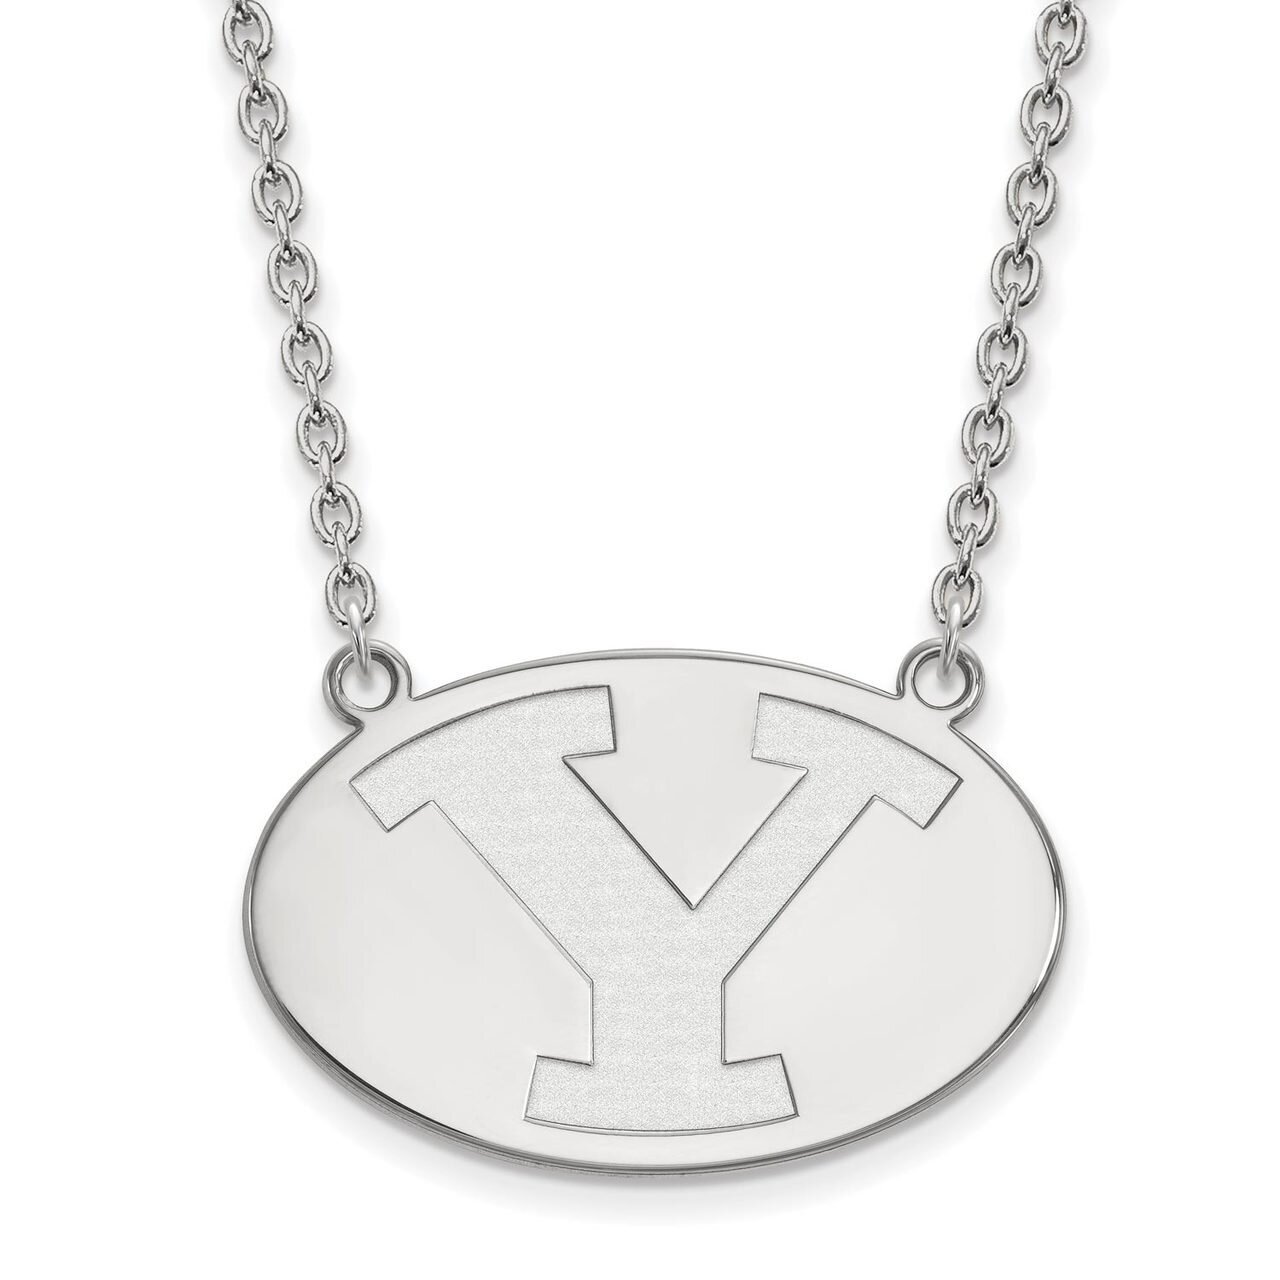 Brigham Young University Large Pendant with Chain Necklace 14k White Gold 4W010BYU-18